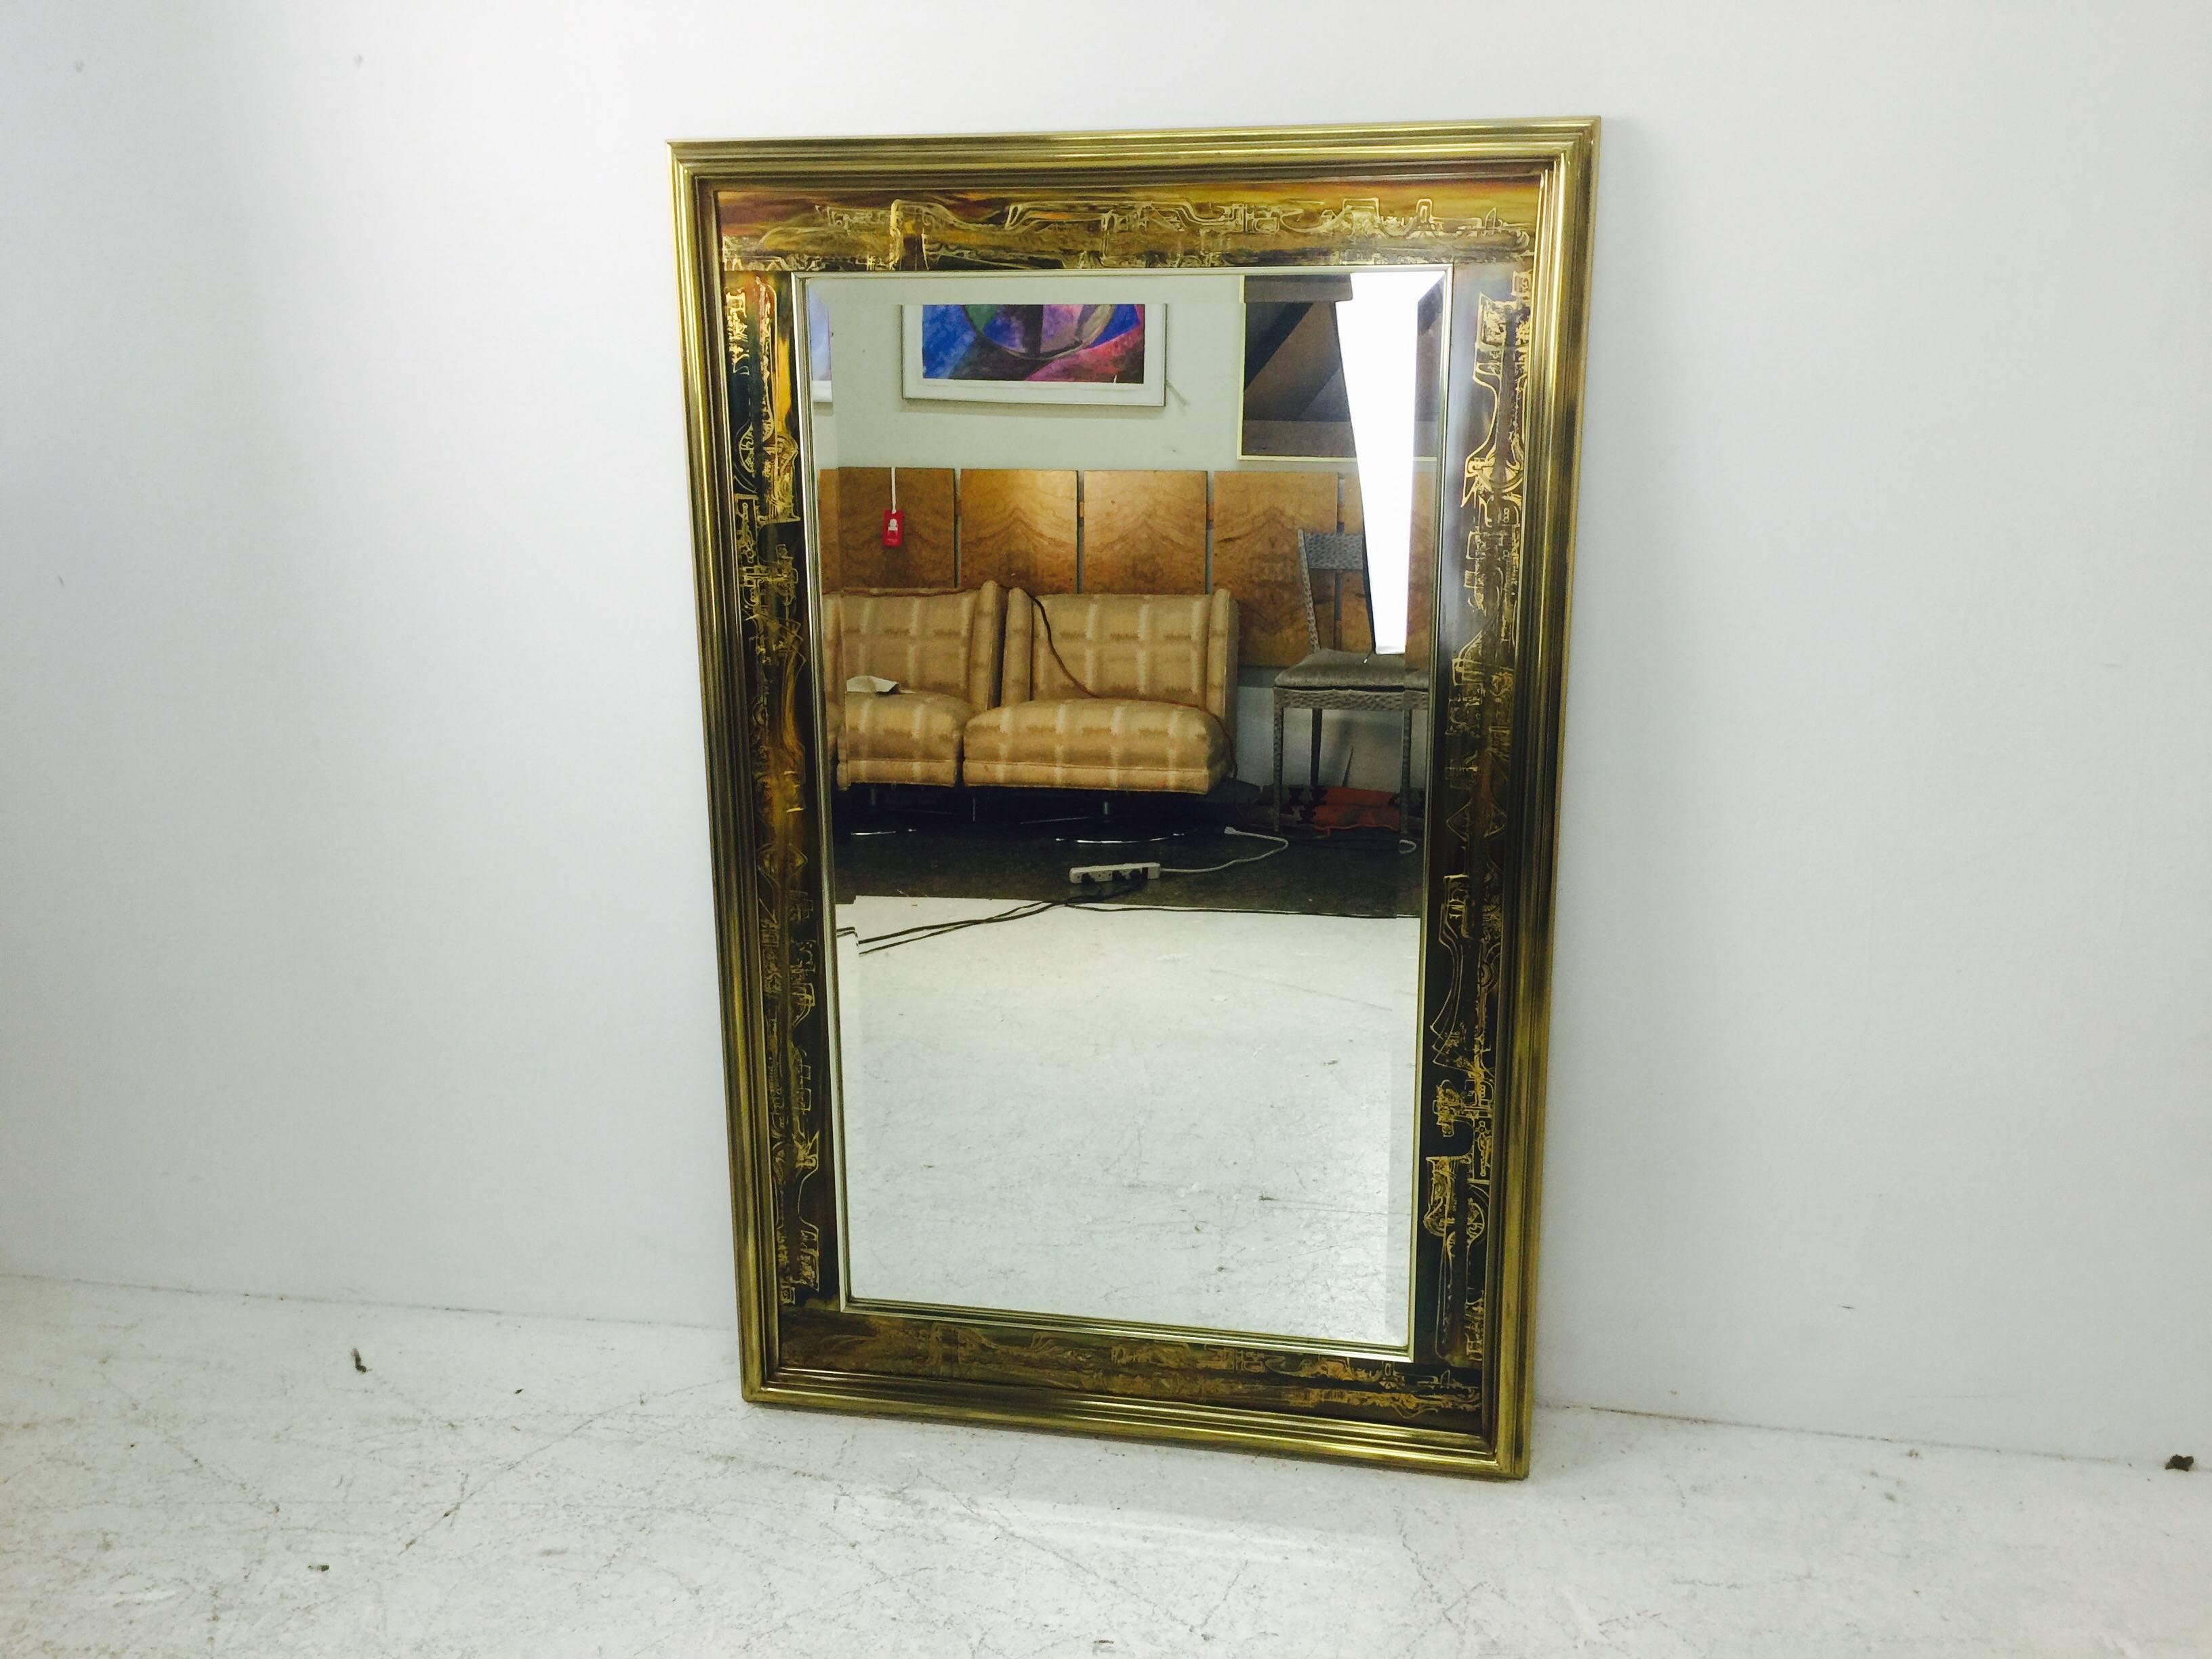 Stunning beveled mirror by Bernhard Rohne for Mastercraft featuring his iconic acid-etched brass panels. Mirror can be positioned vertically or horizontally. 

Measures: 34